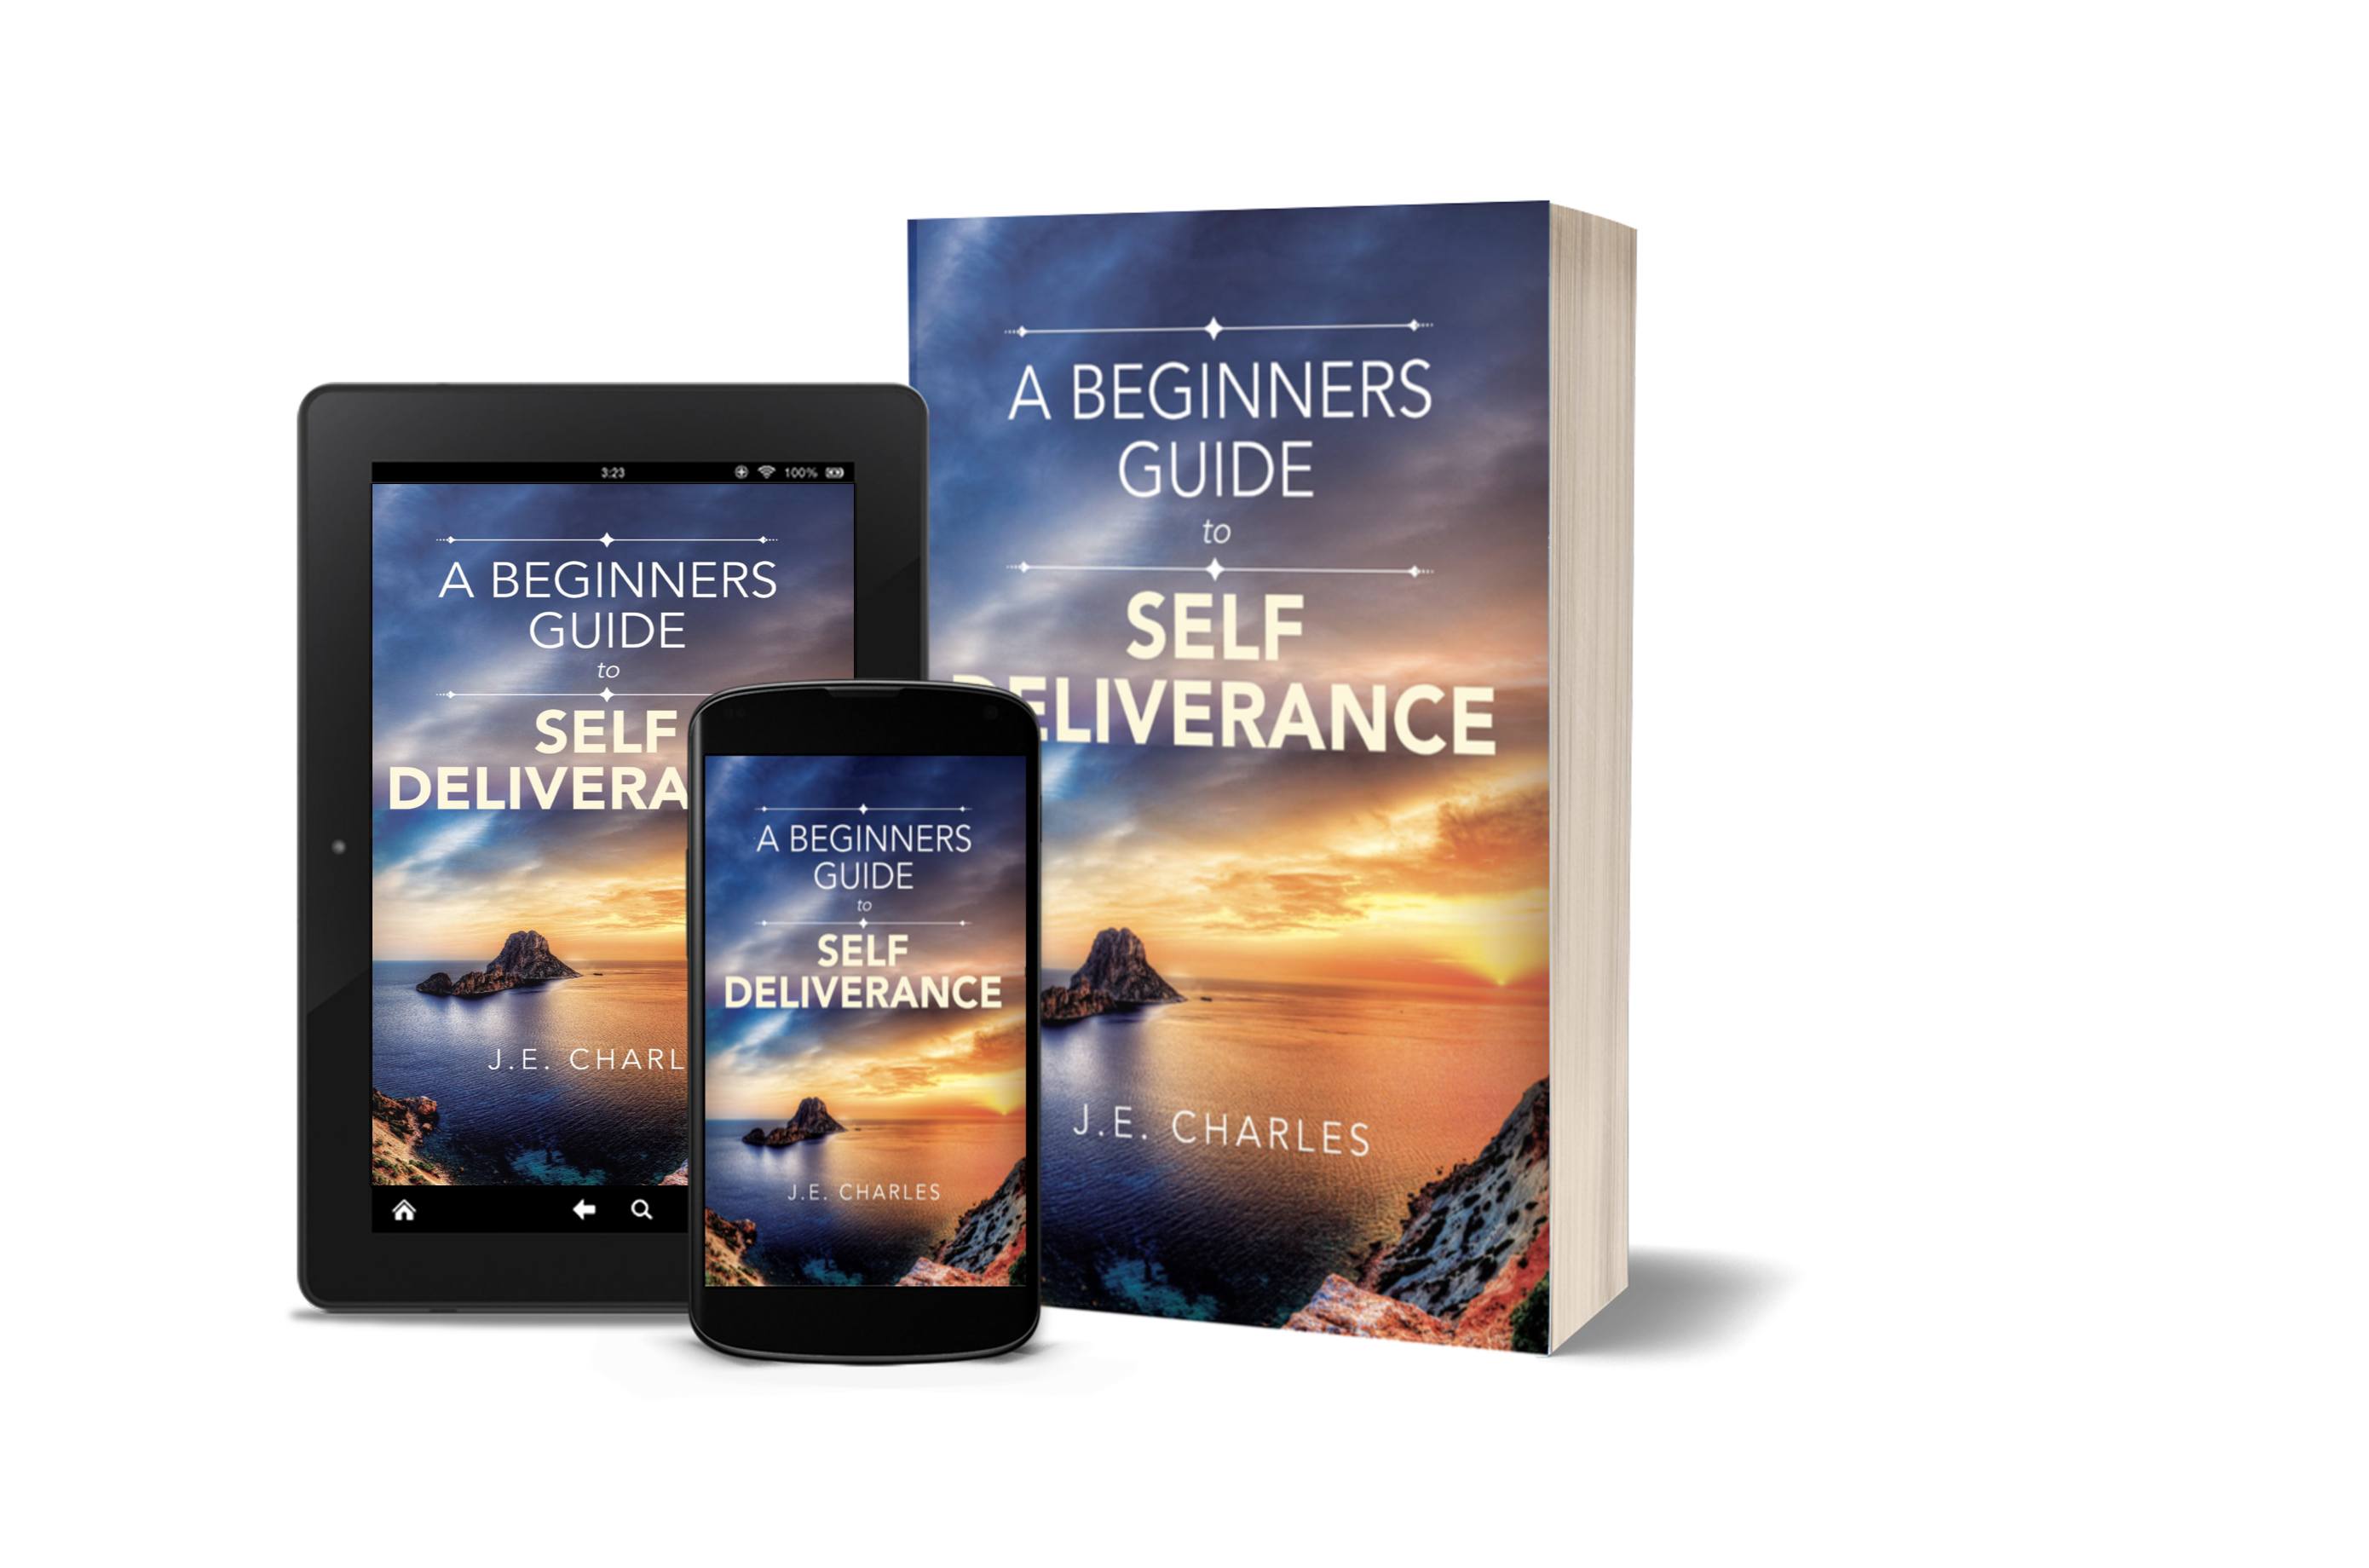 A Beginners Guide to Self Deliverance